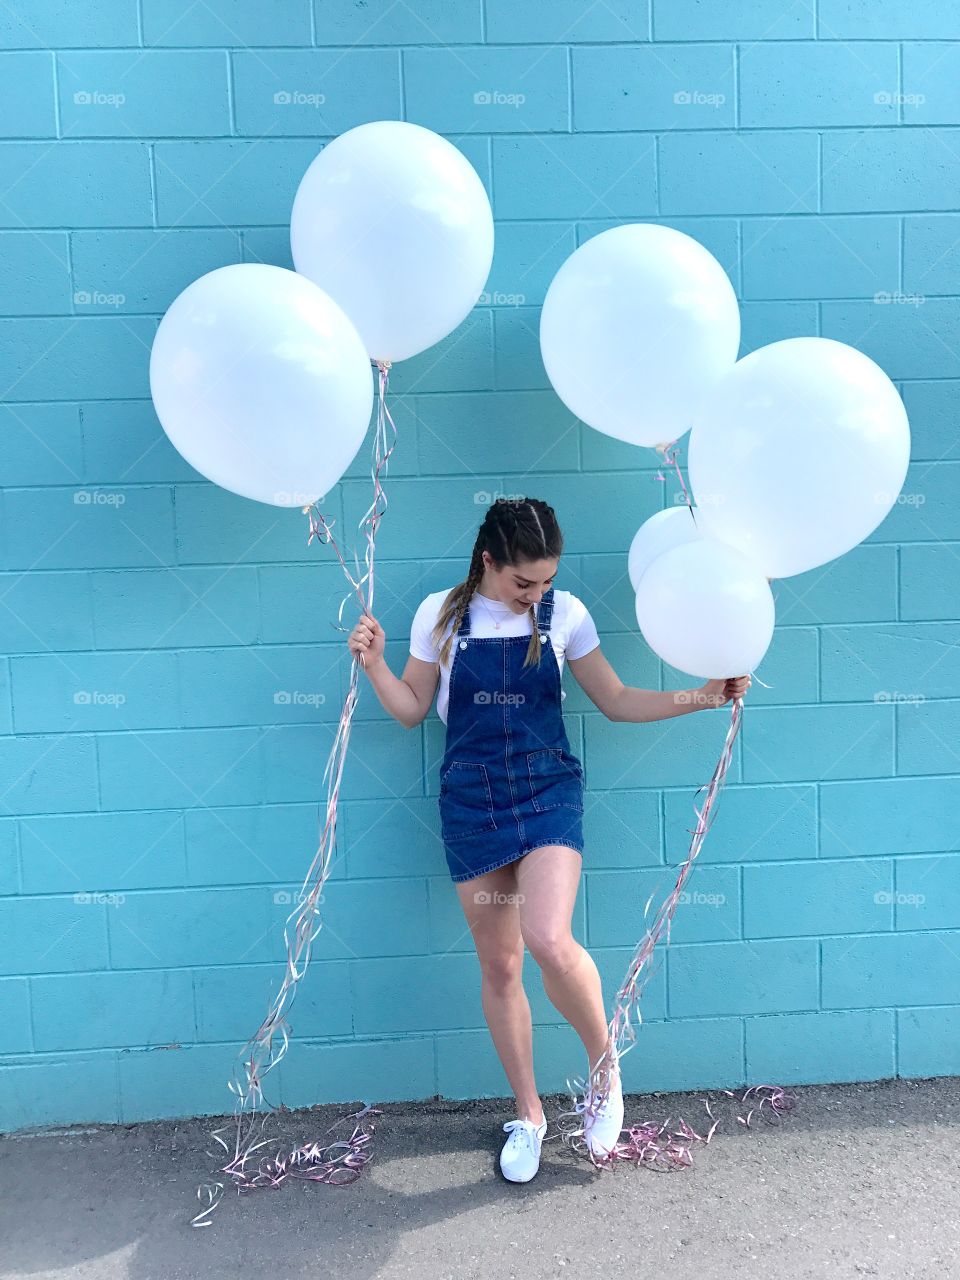 Balloons and a girl